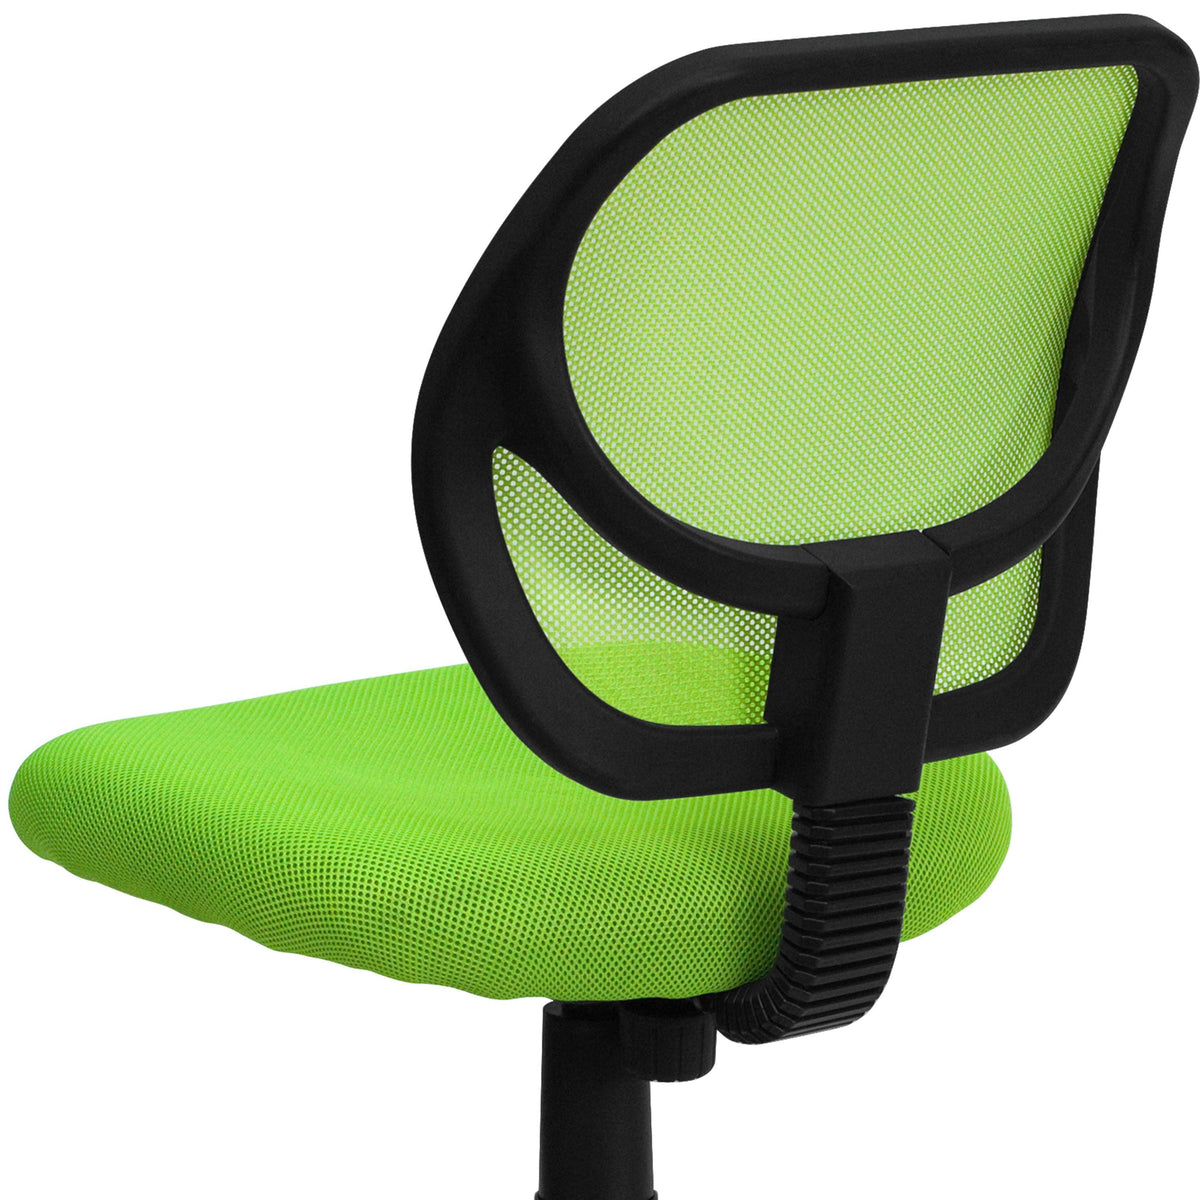 Green |#| Low Back Green Transparent Mesh Back Adjustable Height Swivel Task Office Chair